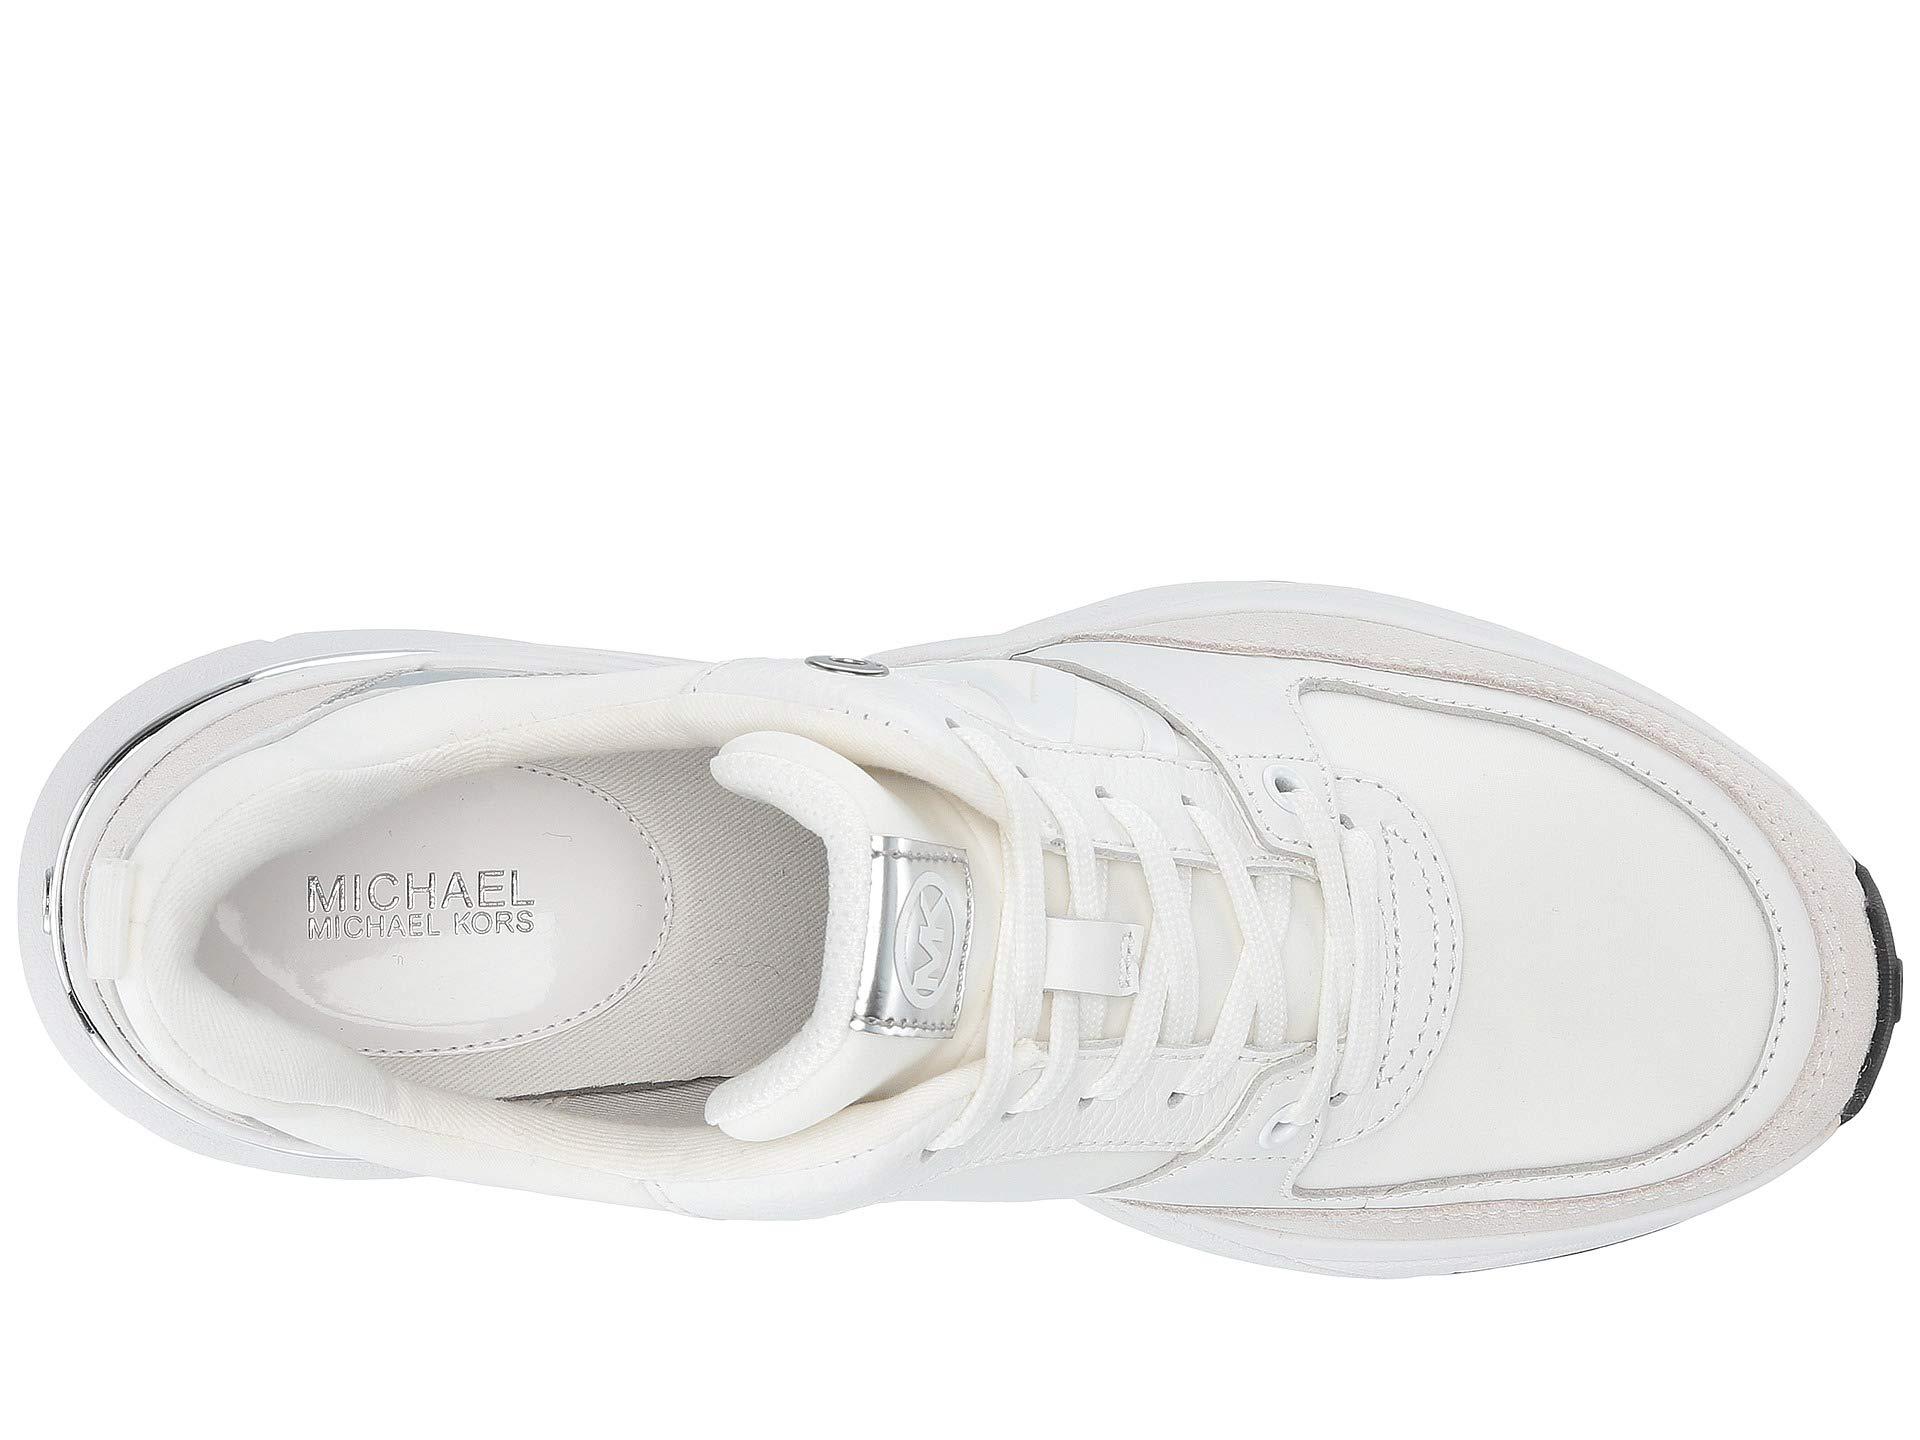 Michael Kors, Shoes, New Michael Kors Mickey Trainer Sneakers